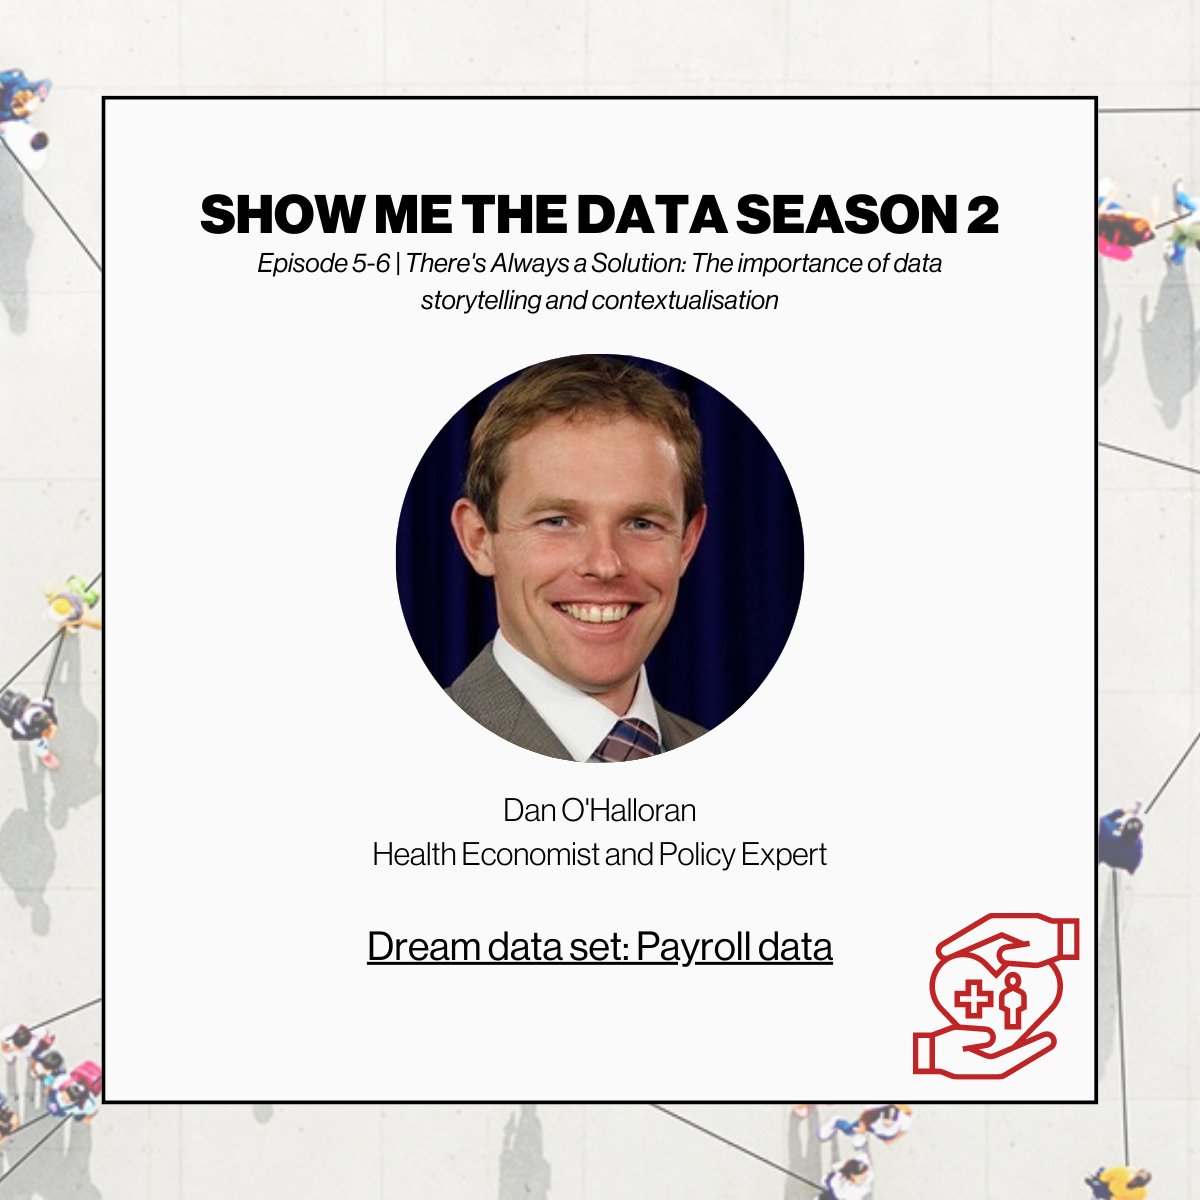 Dan O'Halloran wants to have access to payroll data to uncover labour trends & financial constraints. Why? It's not just us, but the next generation too. Listen to the episodes again here 🎧 Part 1: bit.ly/smtd-s2e5 🎧 Part 2: bit.ly/smtd-s2e6